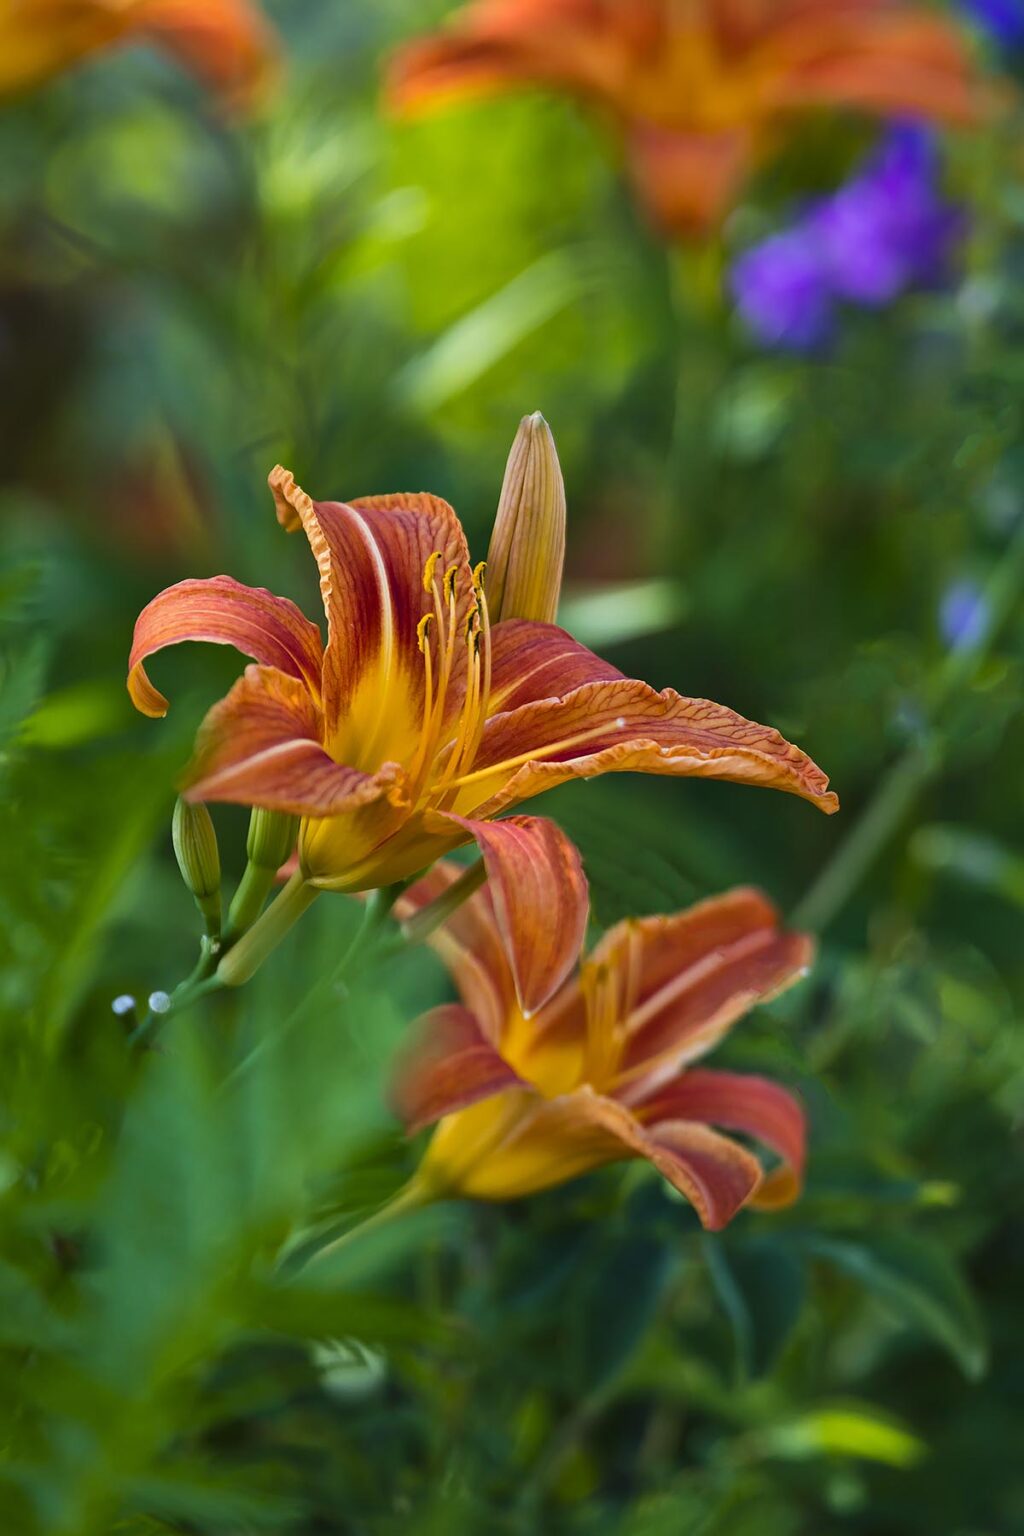 LILIES bloom in STONINGTON a major lobster fishing port and tourist destination - DEER ISLAND, MAINE